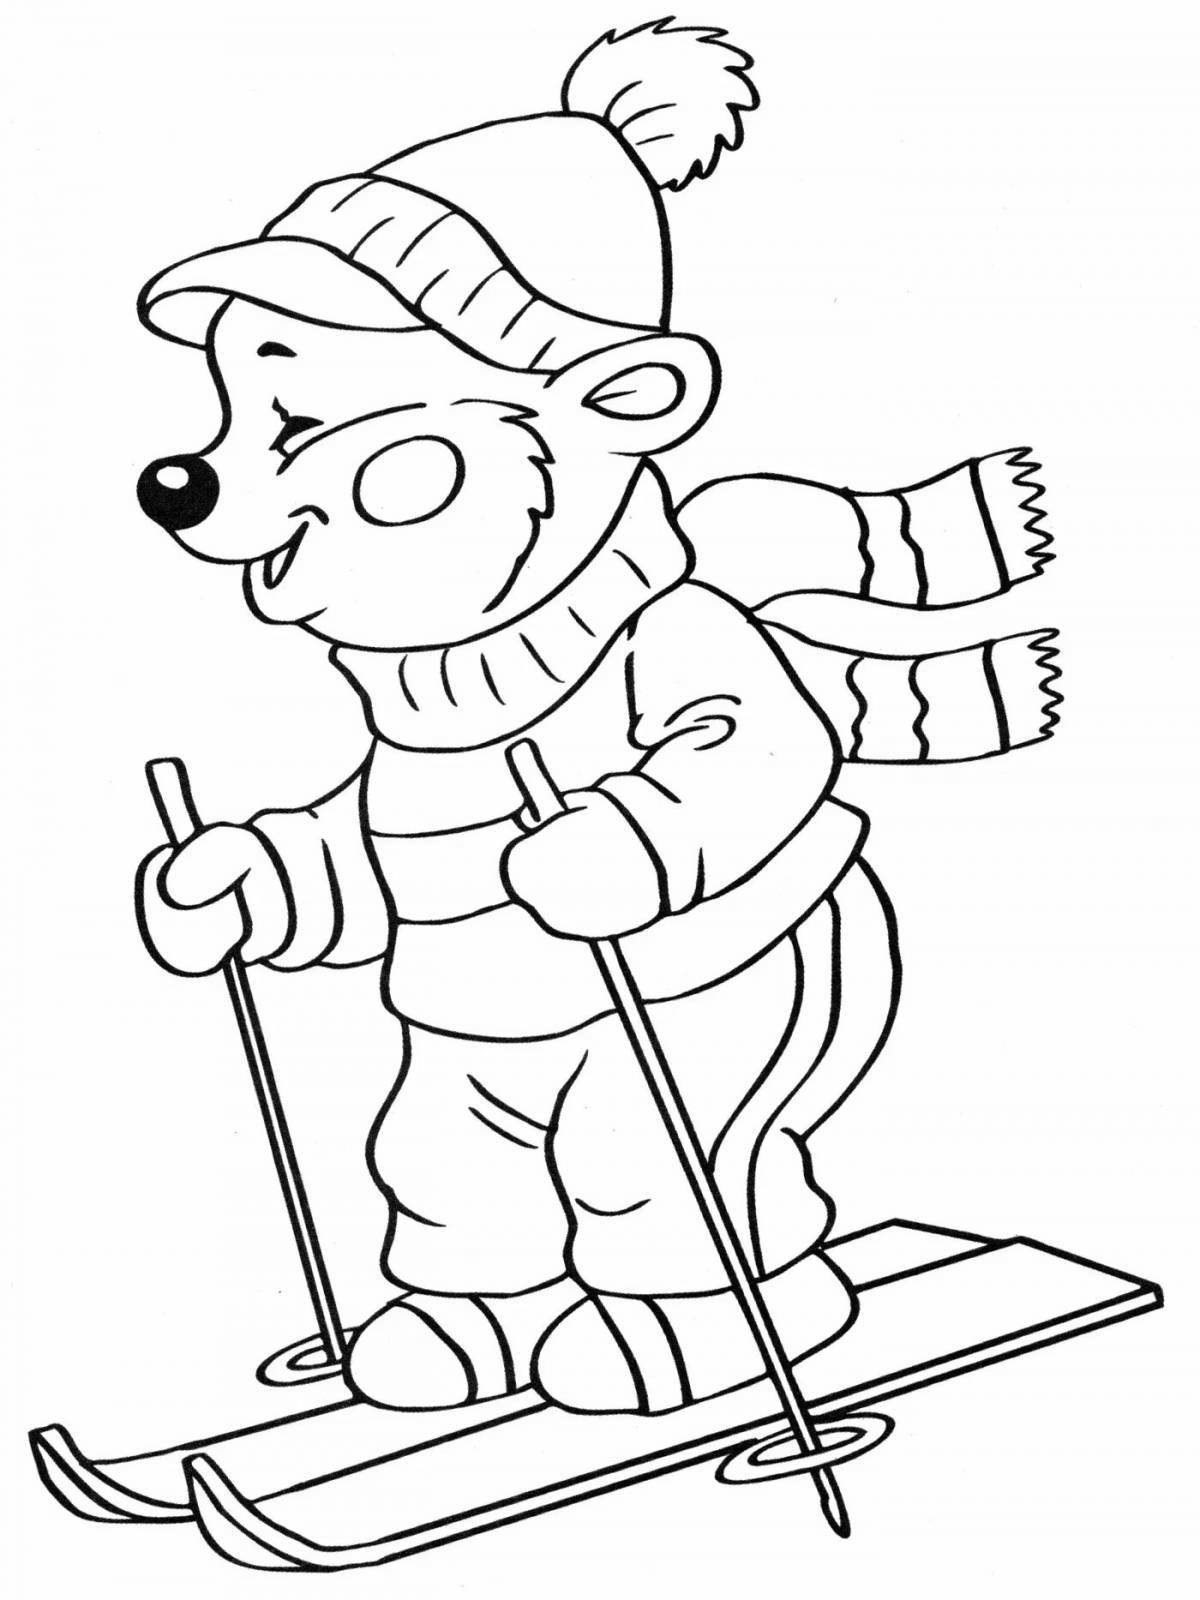 Coloring book brave skier for children 5-6 years old